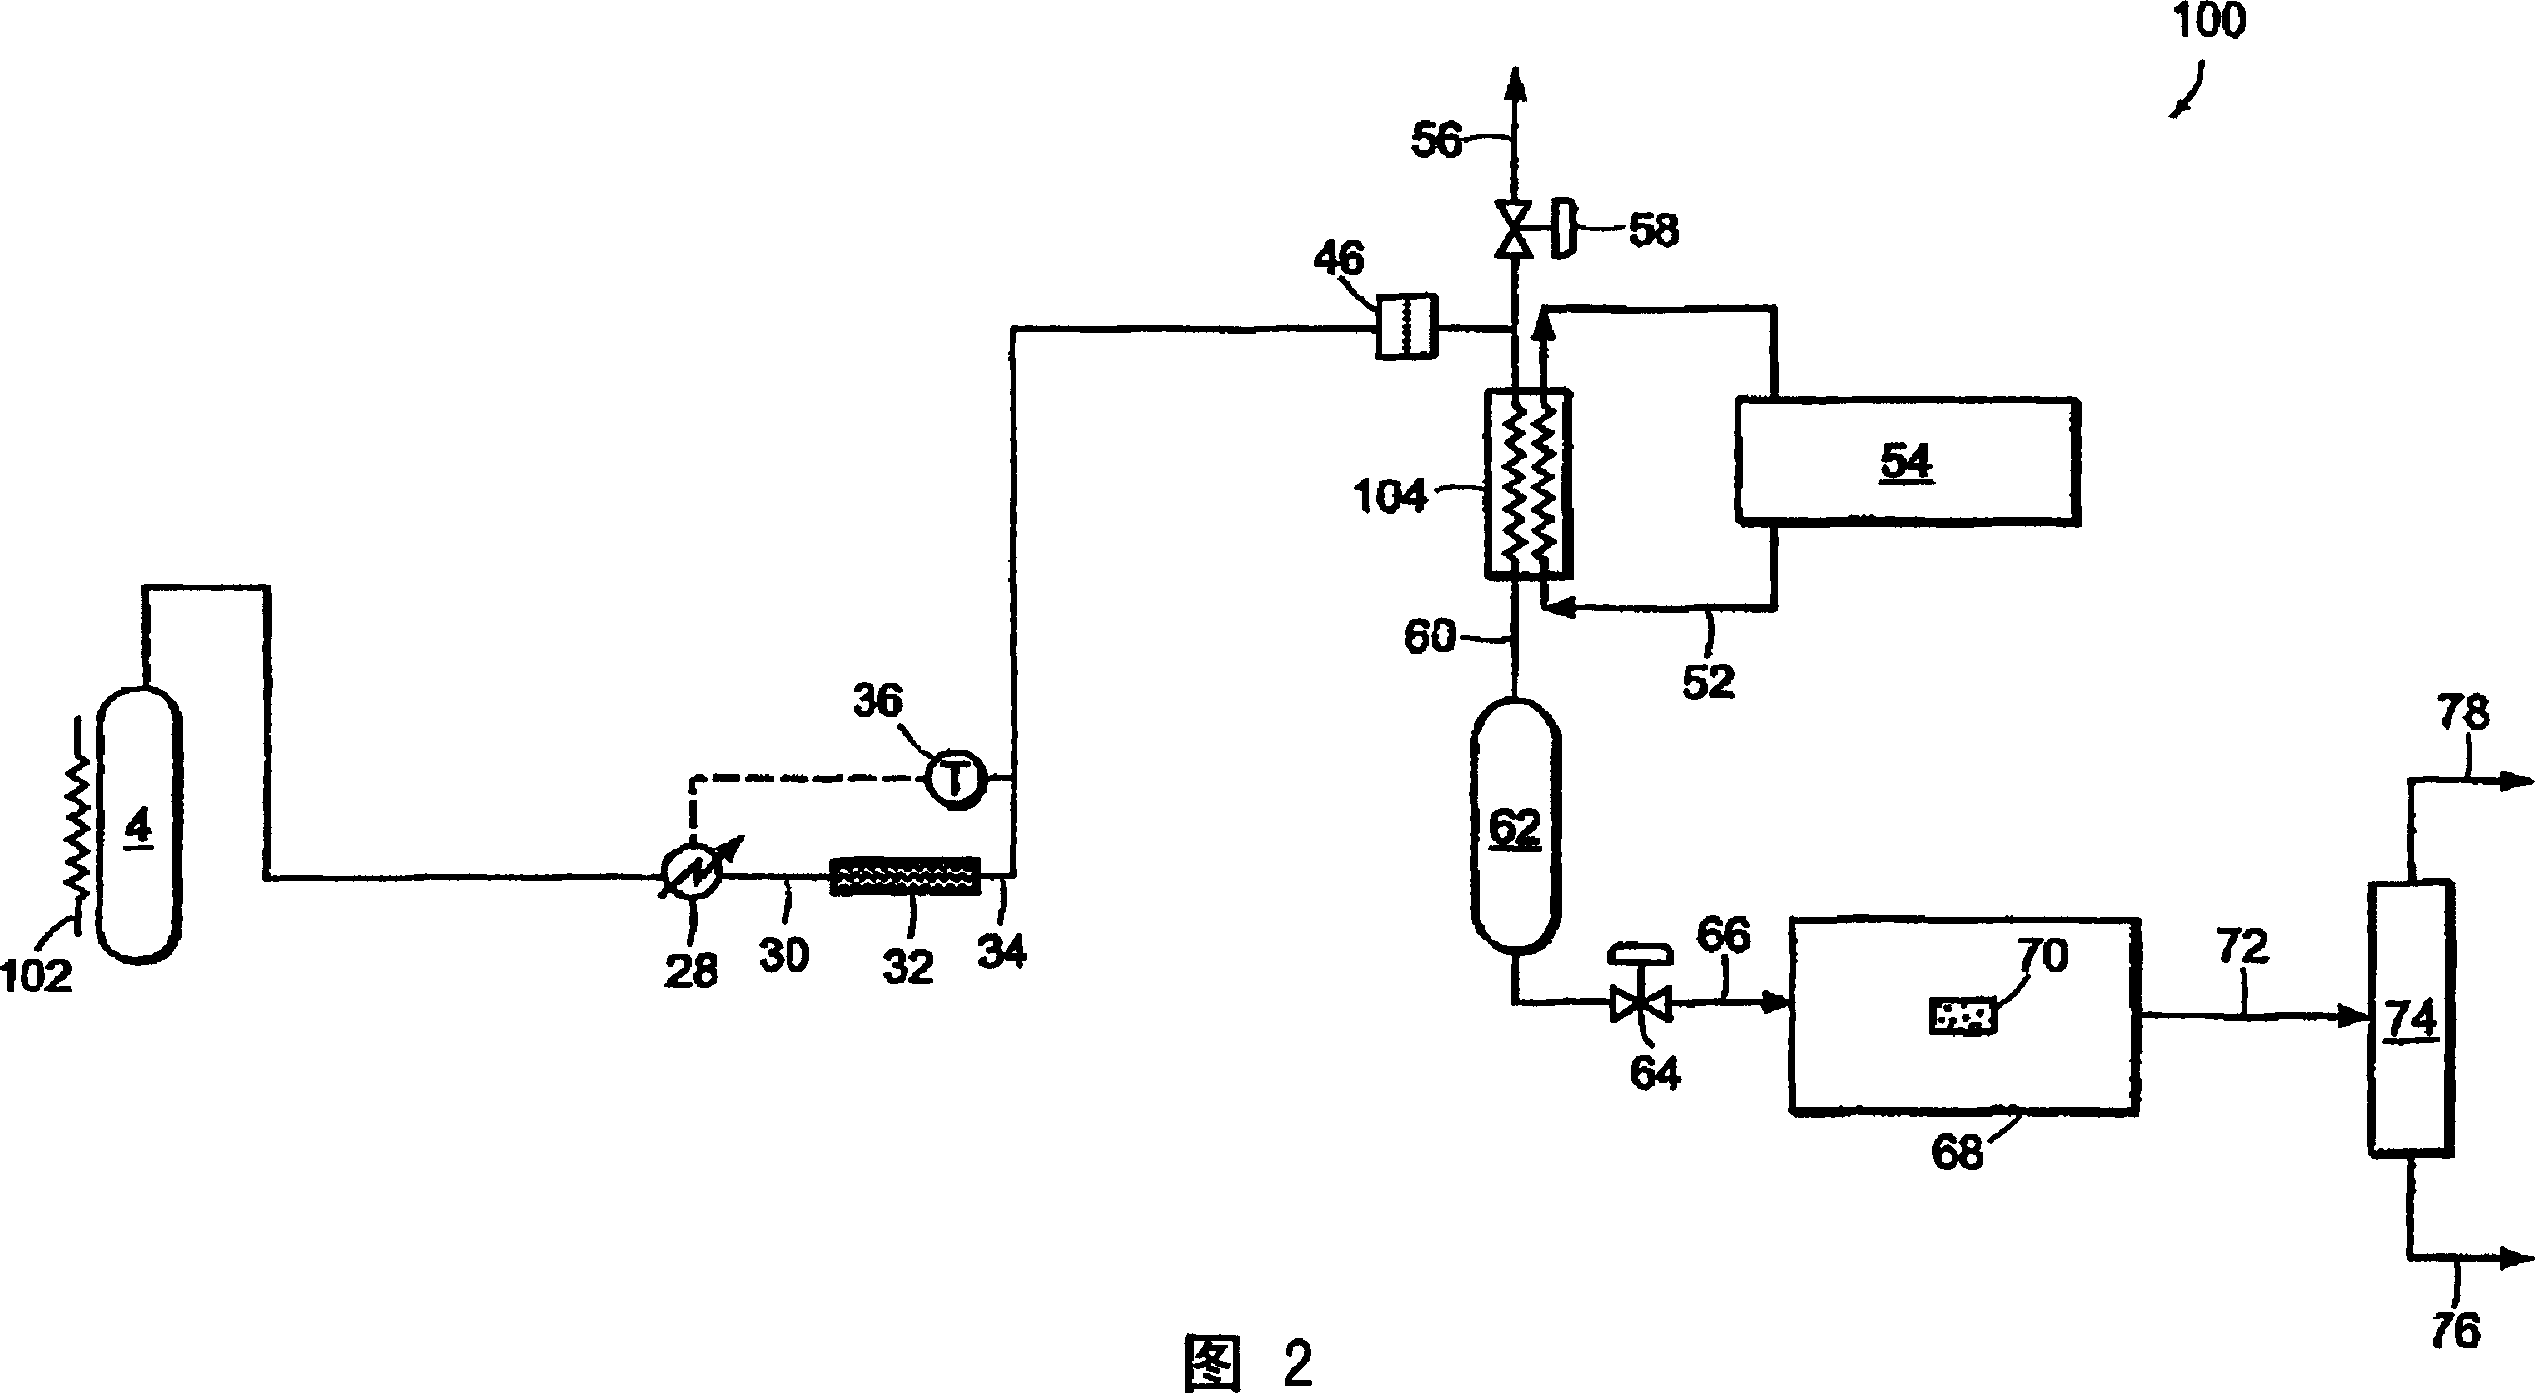 Method for removing contaminants from gases